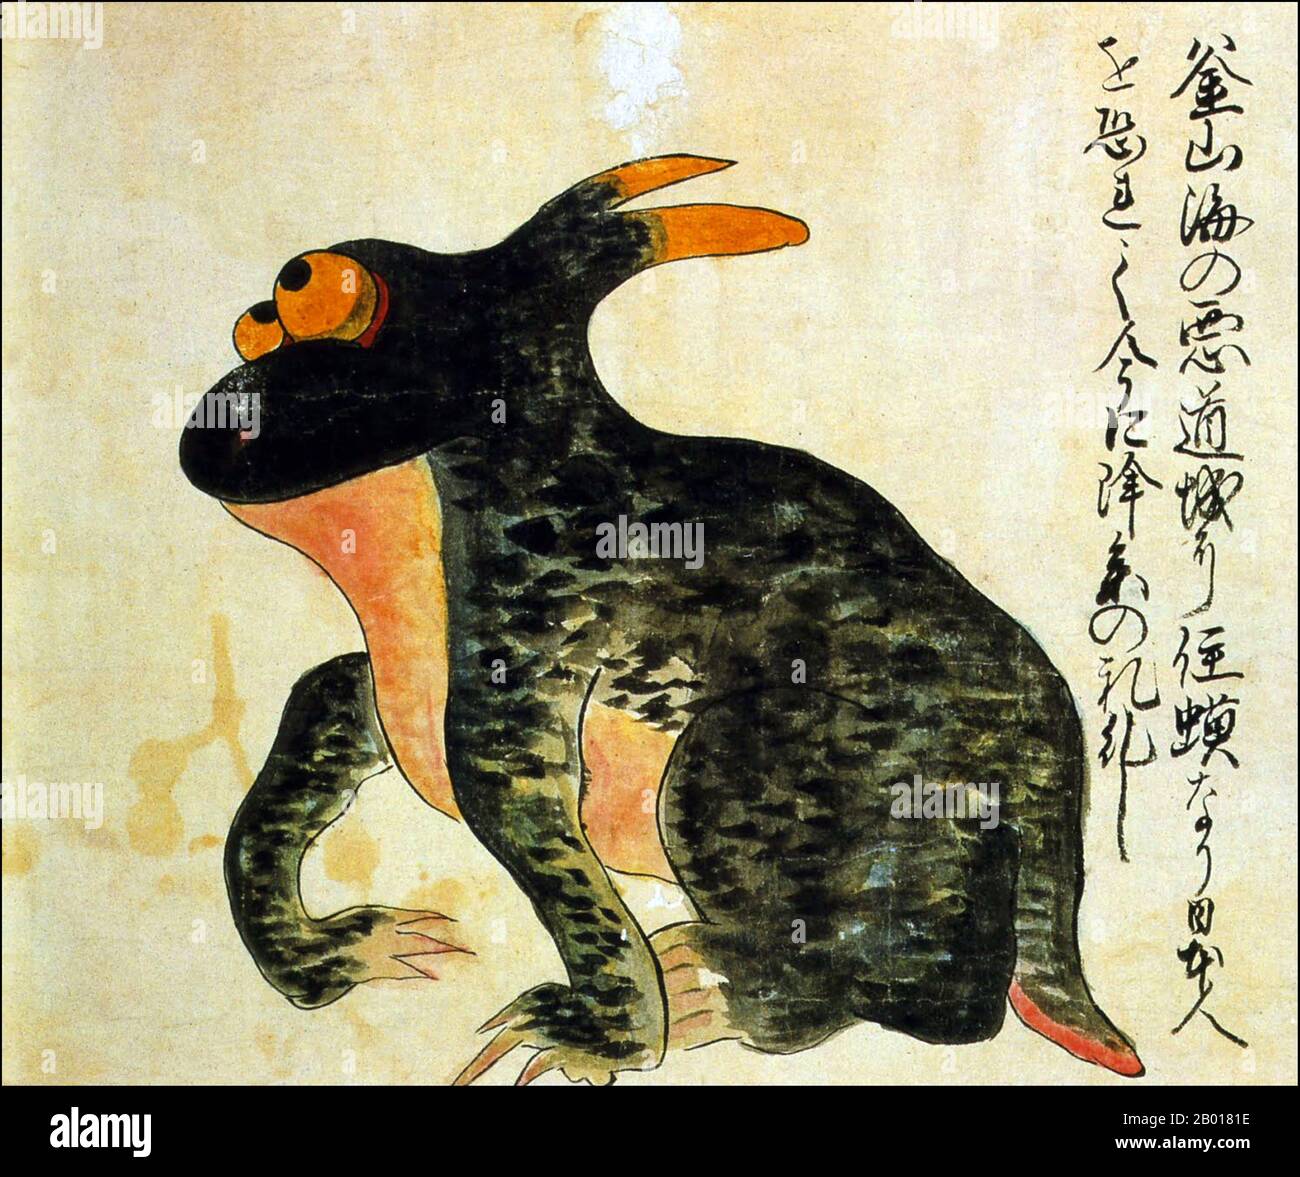 Japan: A huge horned toad believed to inhabit the sea off Pusan (Busan), Korea. From the Kaikidan Ekotoba Monster Scroll, mid-19th century.  The Kaikidan Ekotoba is a mid-19th century handscroll that profiles 33 legendary monsters and human oddities, mostly from the Kyushu region of Japan, but with several from other countries, including China, Russia and Korea. The document, whose author is unknown, is in the possession of the Fukuoka City Museum. Stock Photo